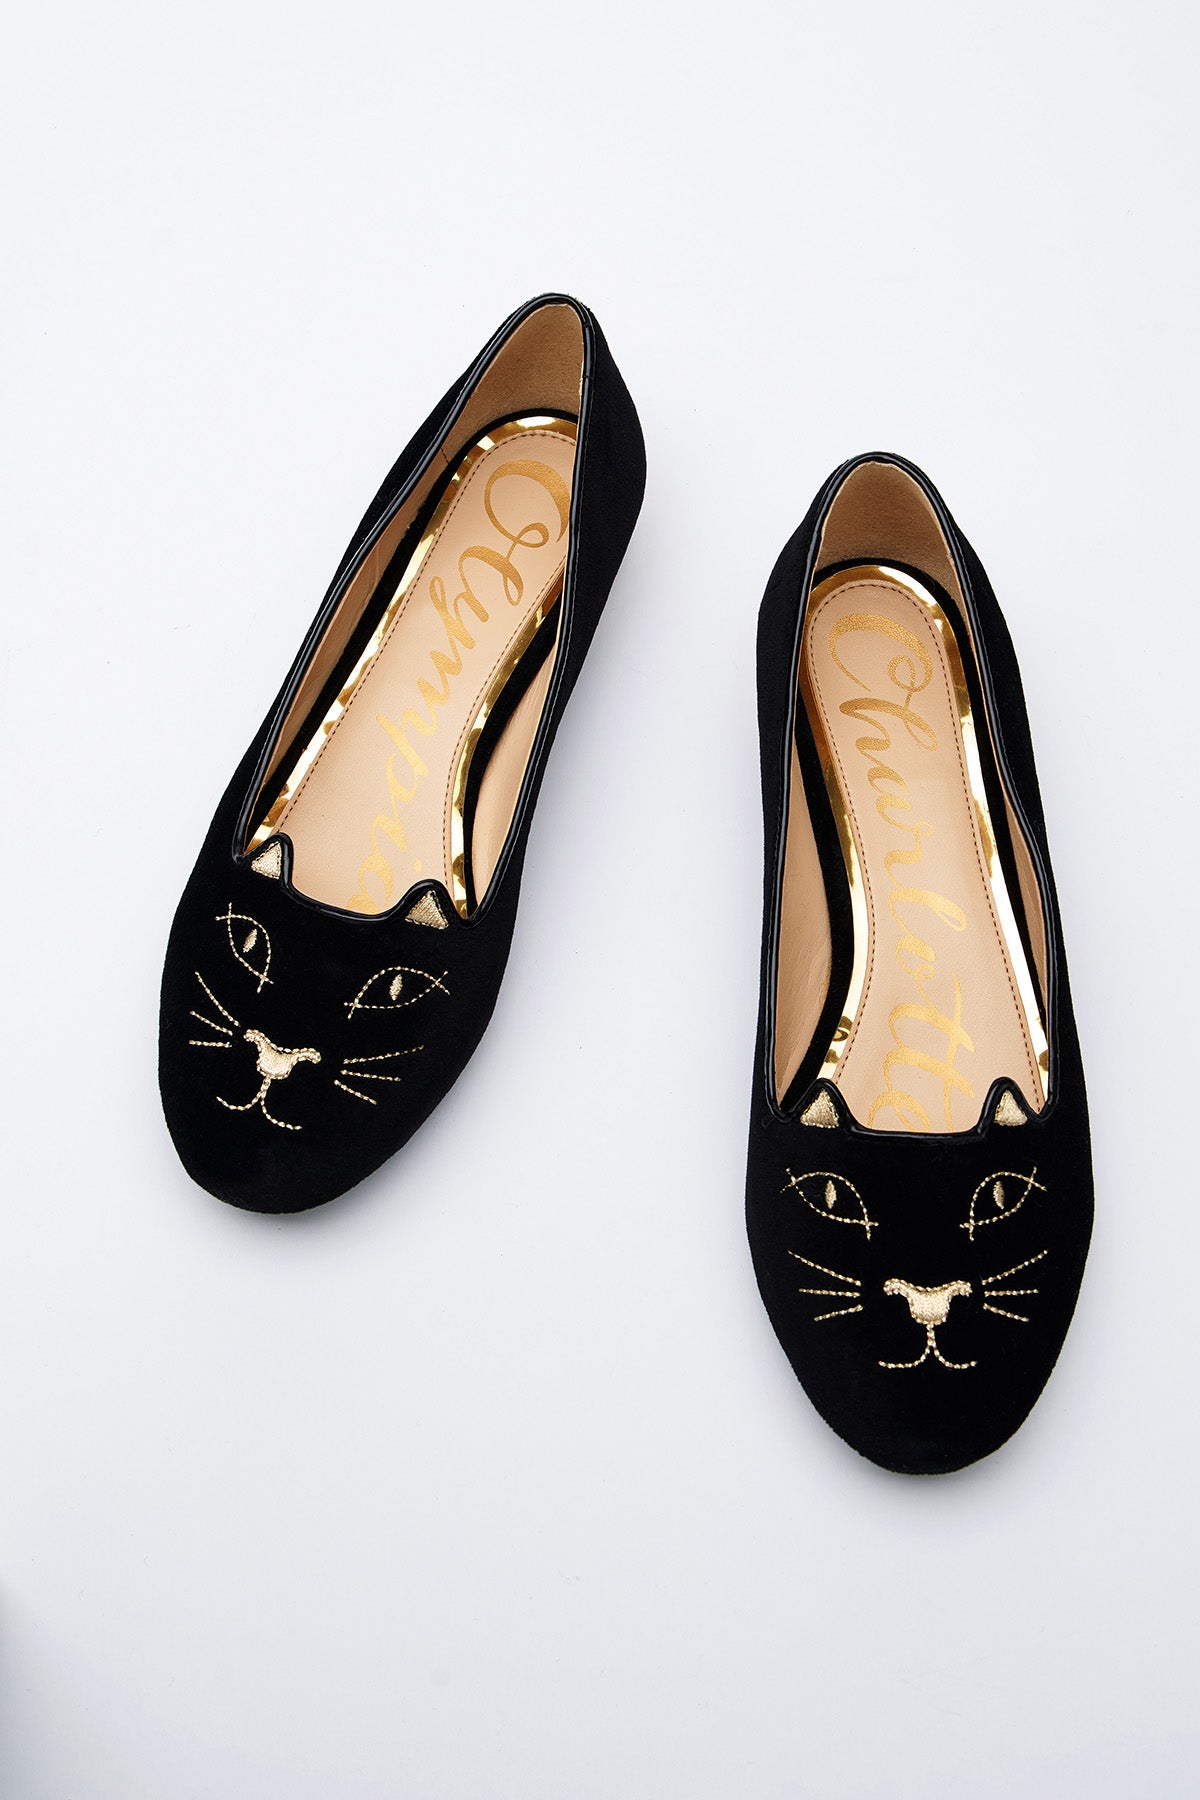 Home page – Charlotte Olympia